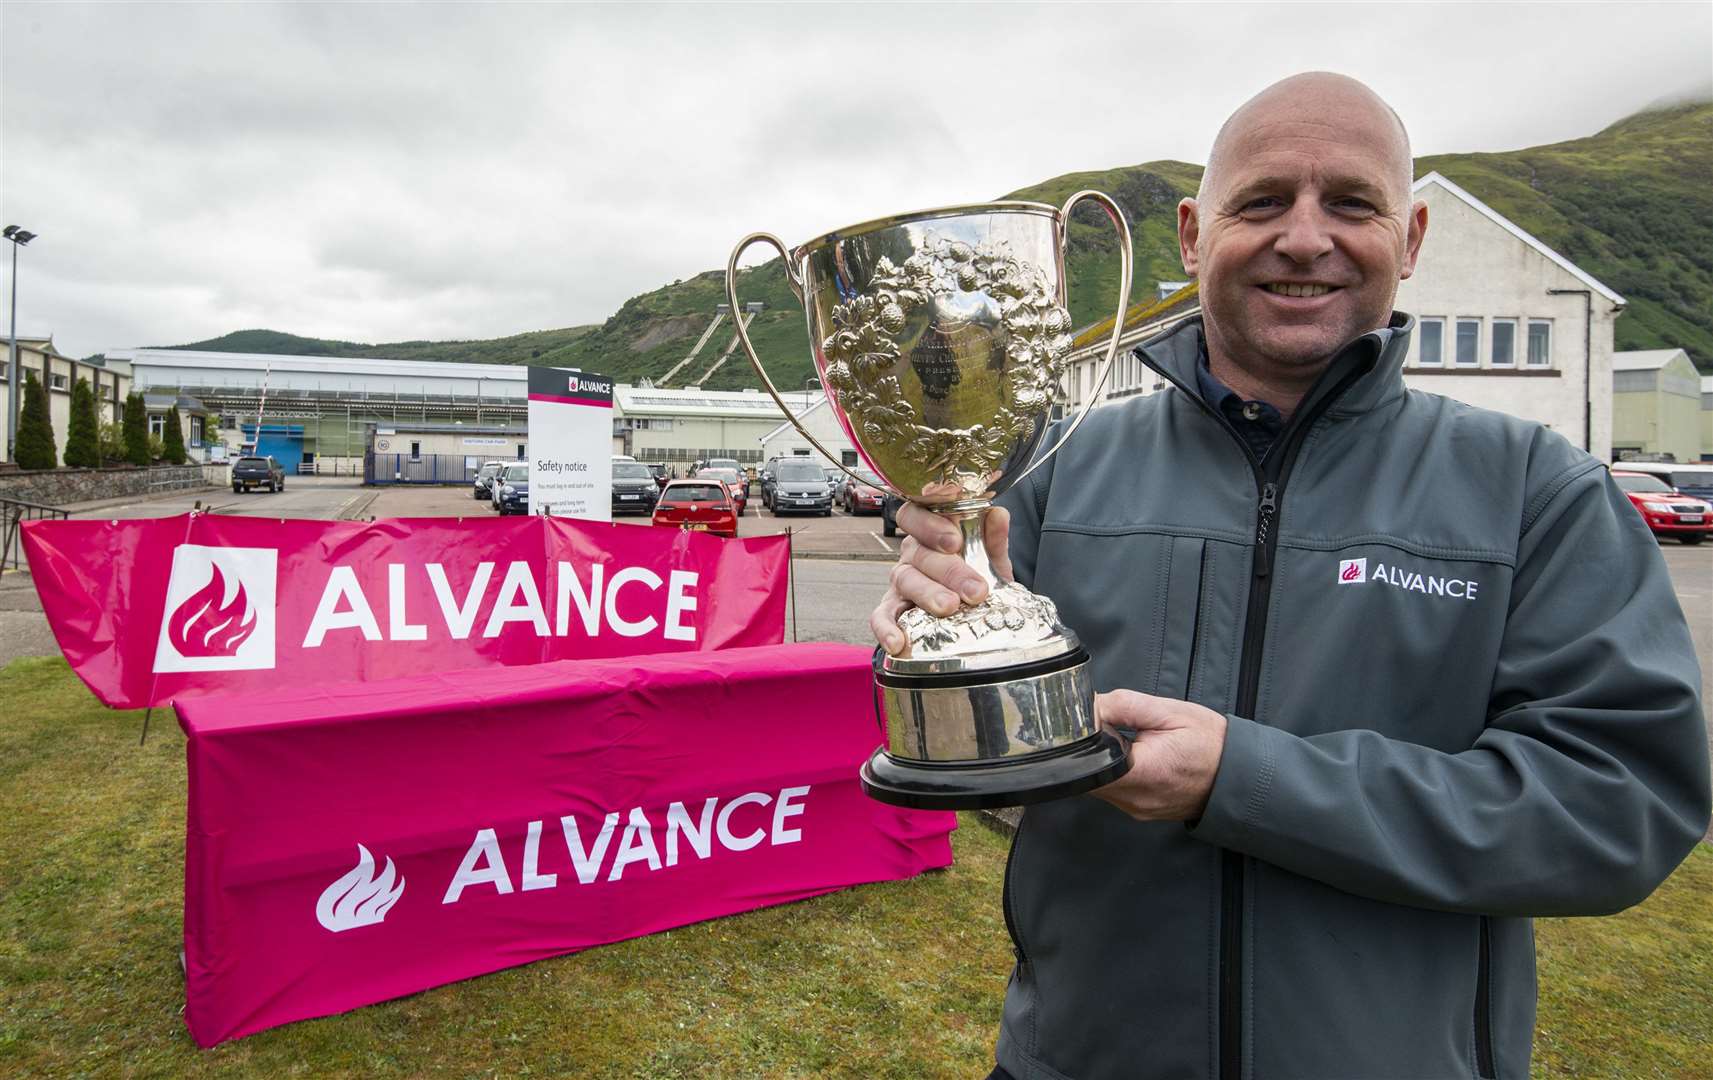 Engineering Maintenance Manager at the Alvance smelter in Fort William Dougie Livingstone made the draw to select opponents in the Alvance British Aluminium Balliemore Cup semi-finals. Photograph: Iain Ferguson, alba.photos